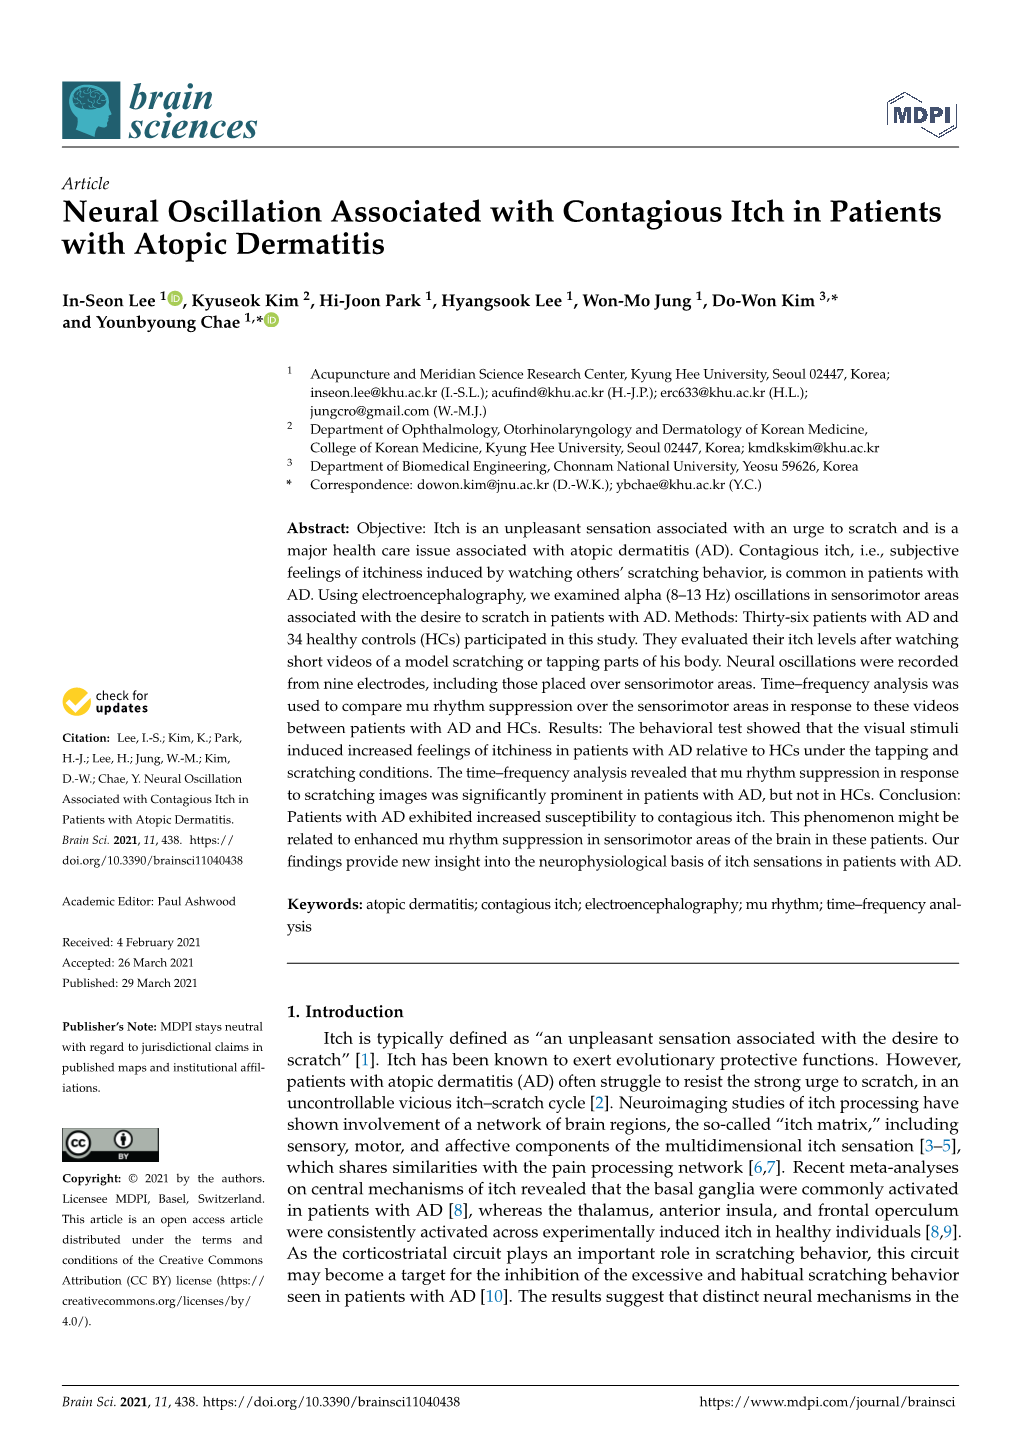 Neural Oscillation Associated with Contagious Itch in Patients with Atopic Dermatitis